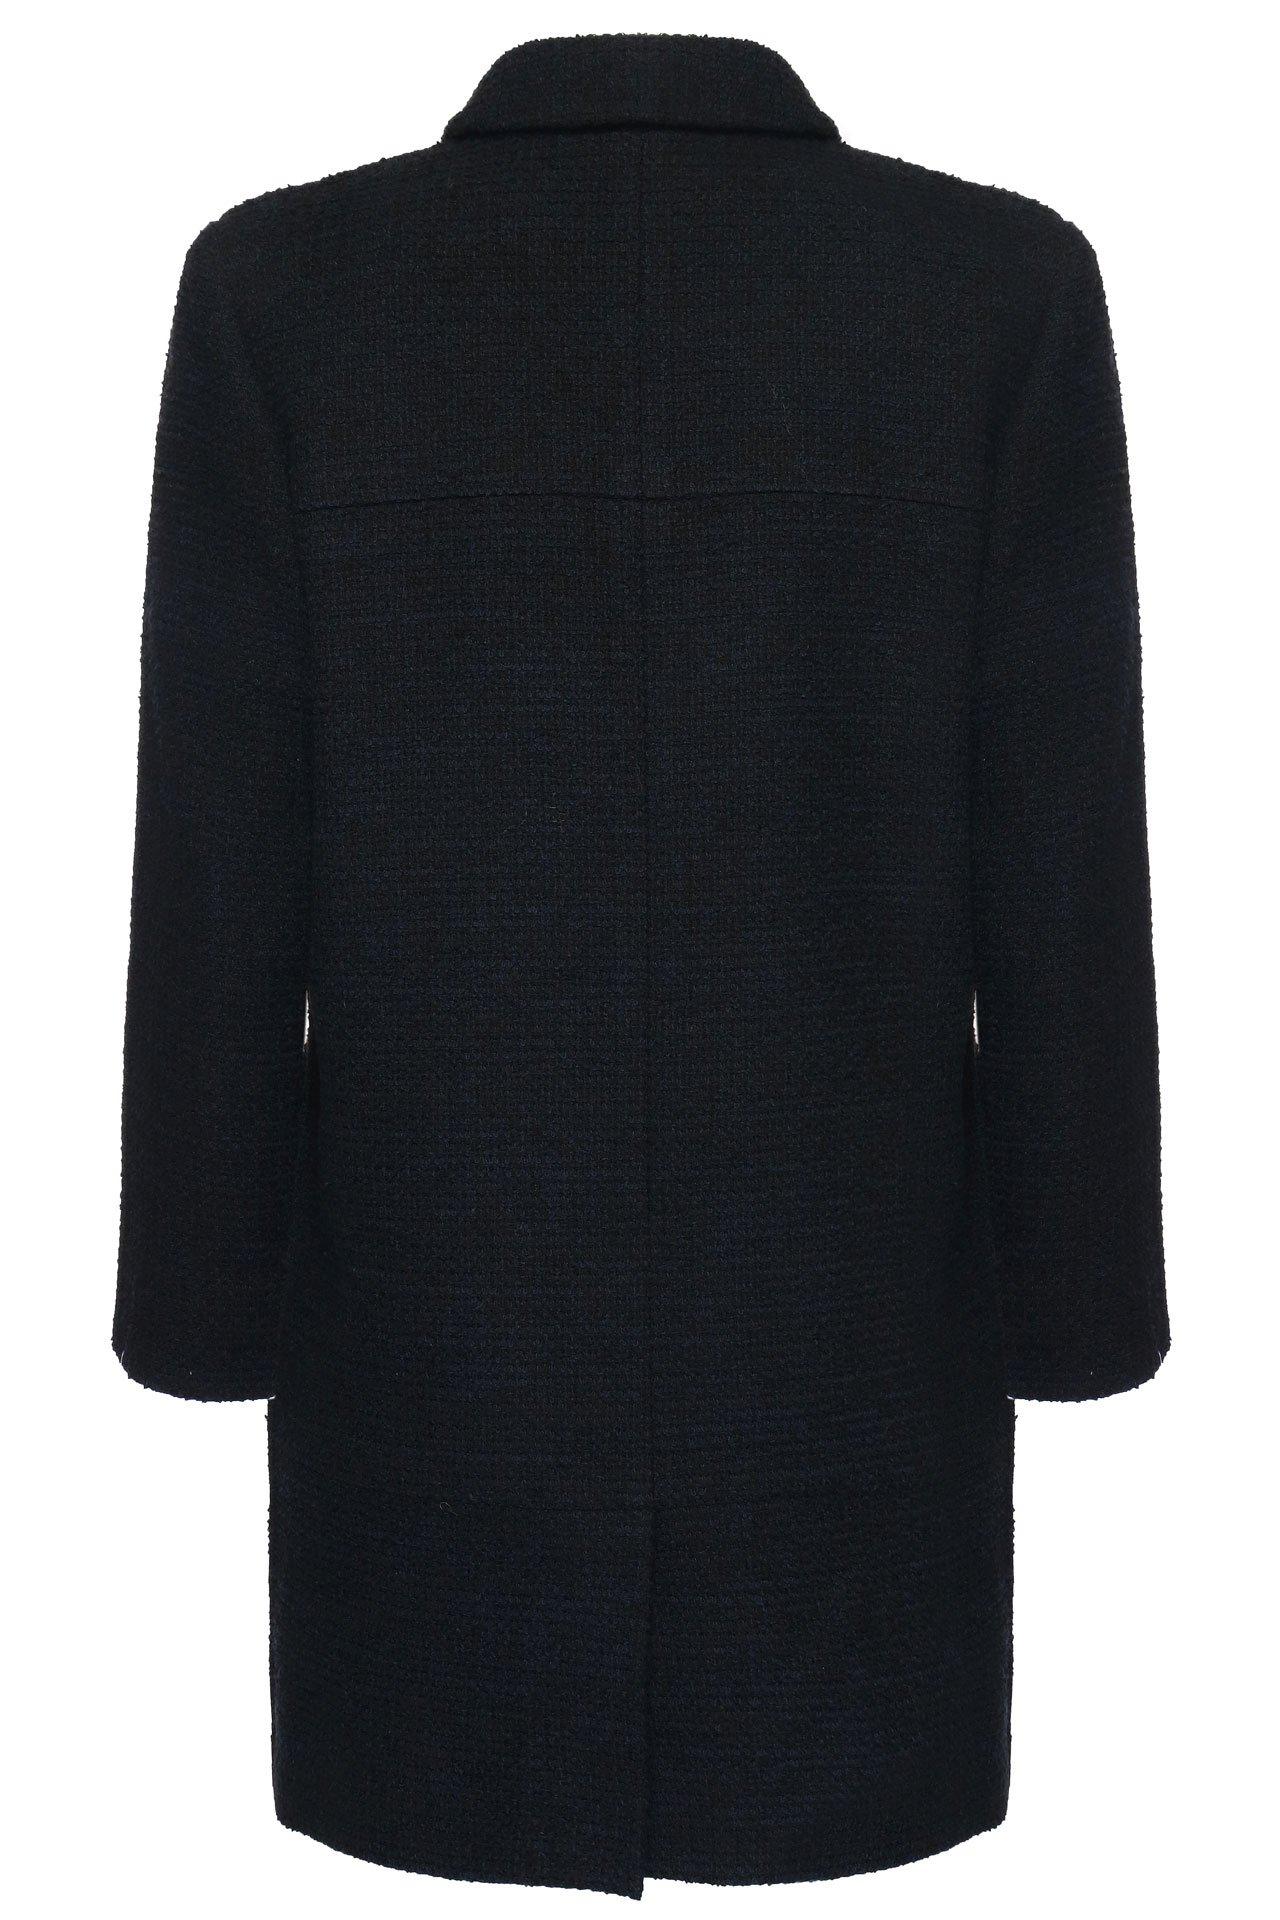 Chanel New CC Buttons Tweed Jacket For Sale 2